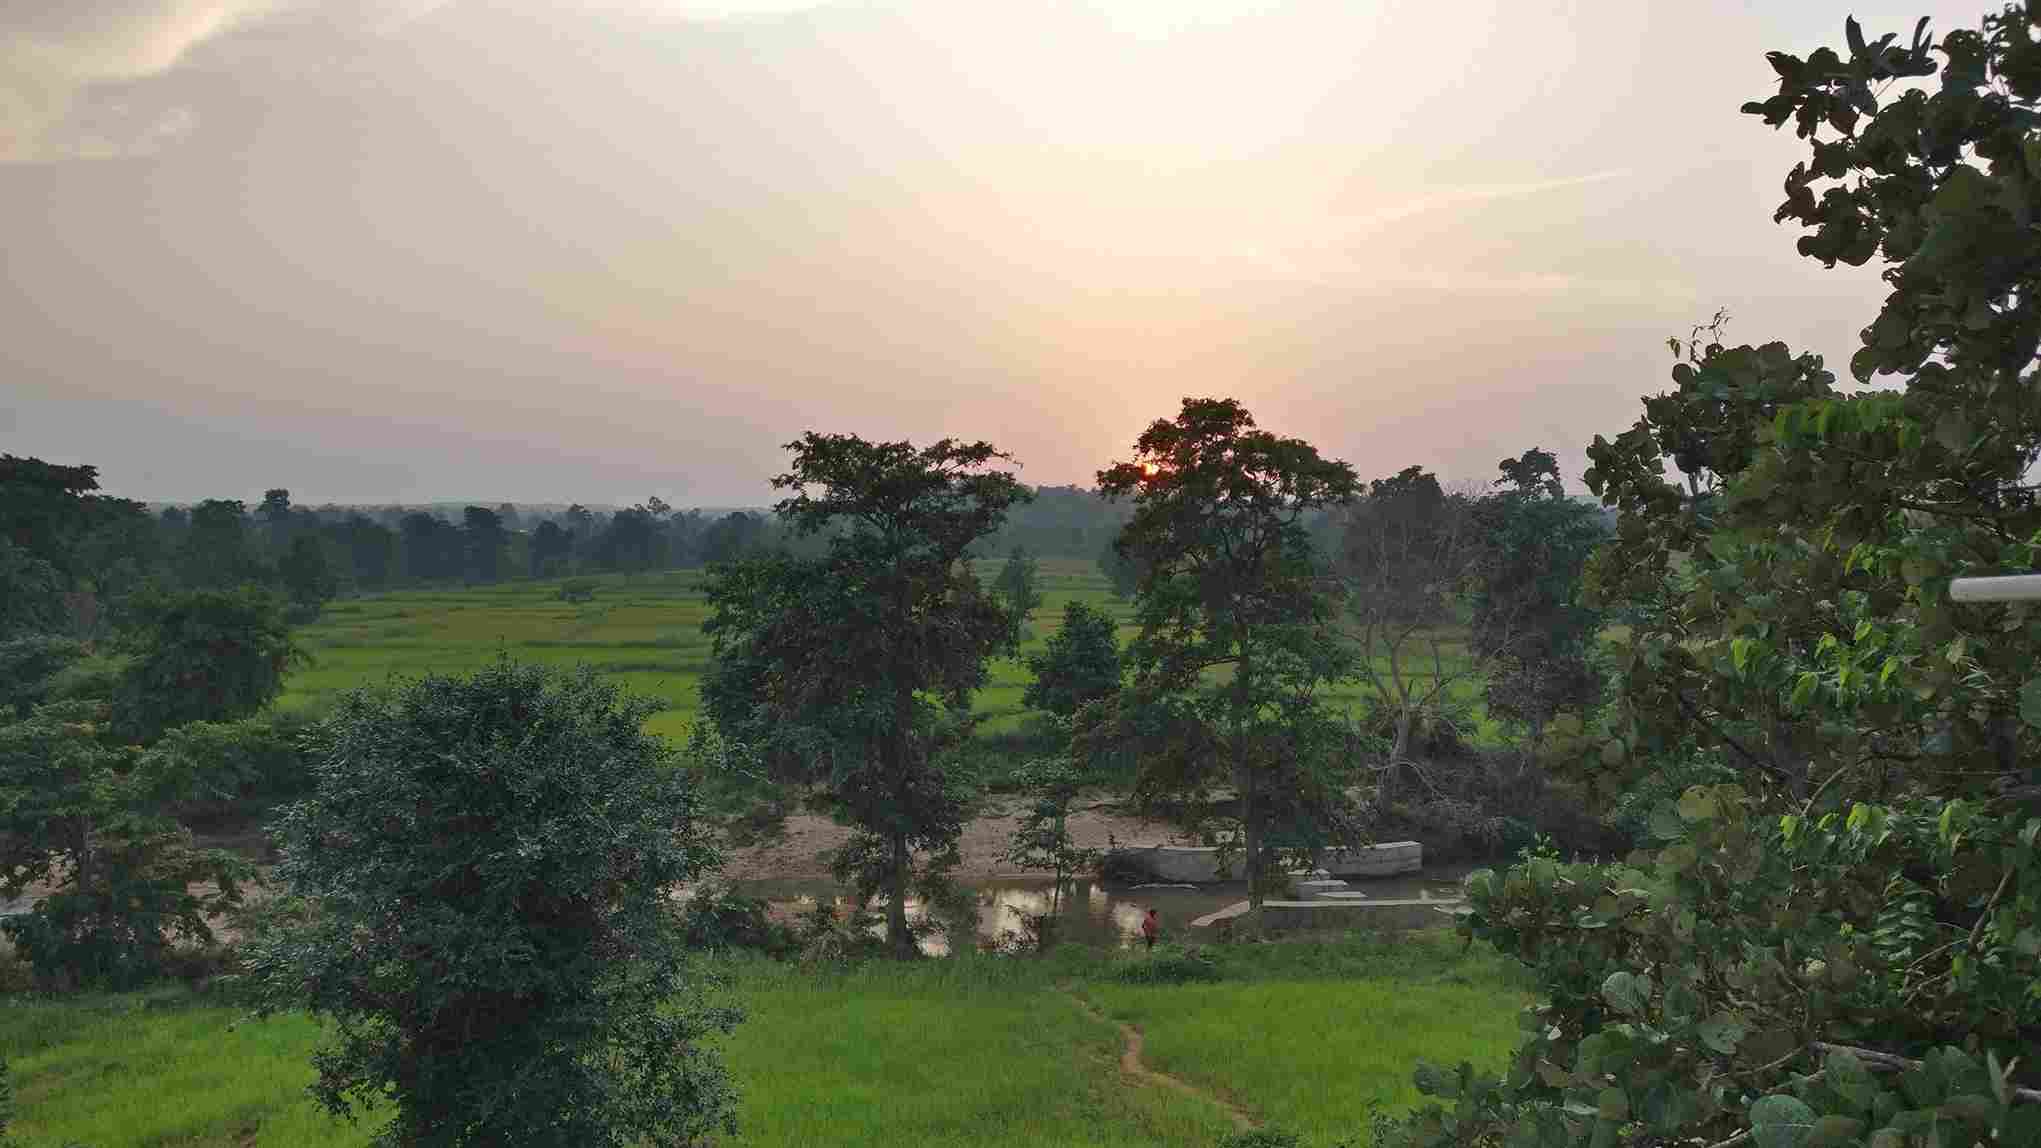 The forest reserve in Kanha National Park currently boasts 4000 trees.